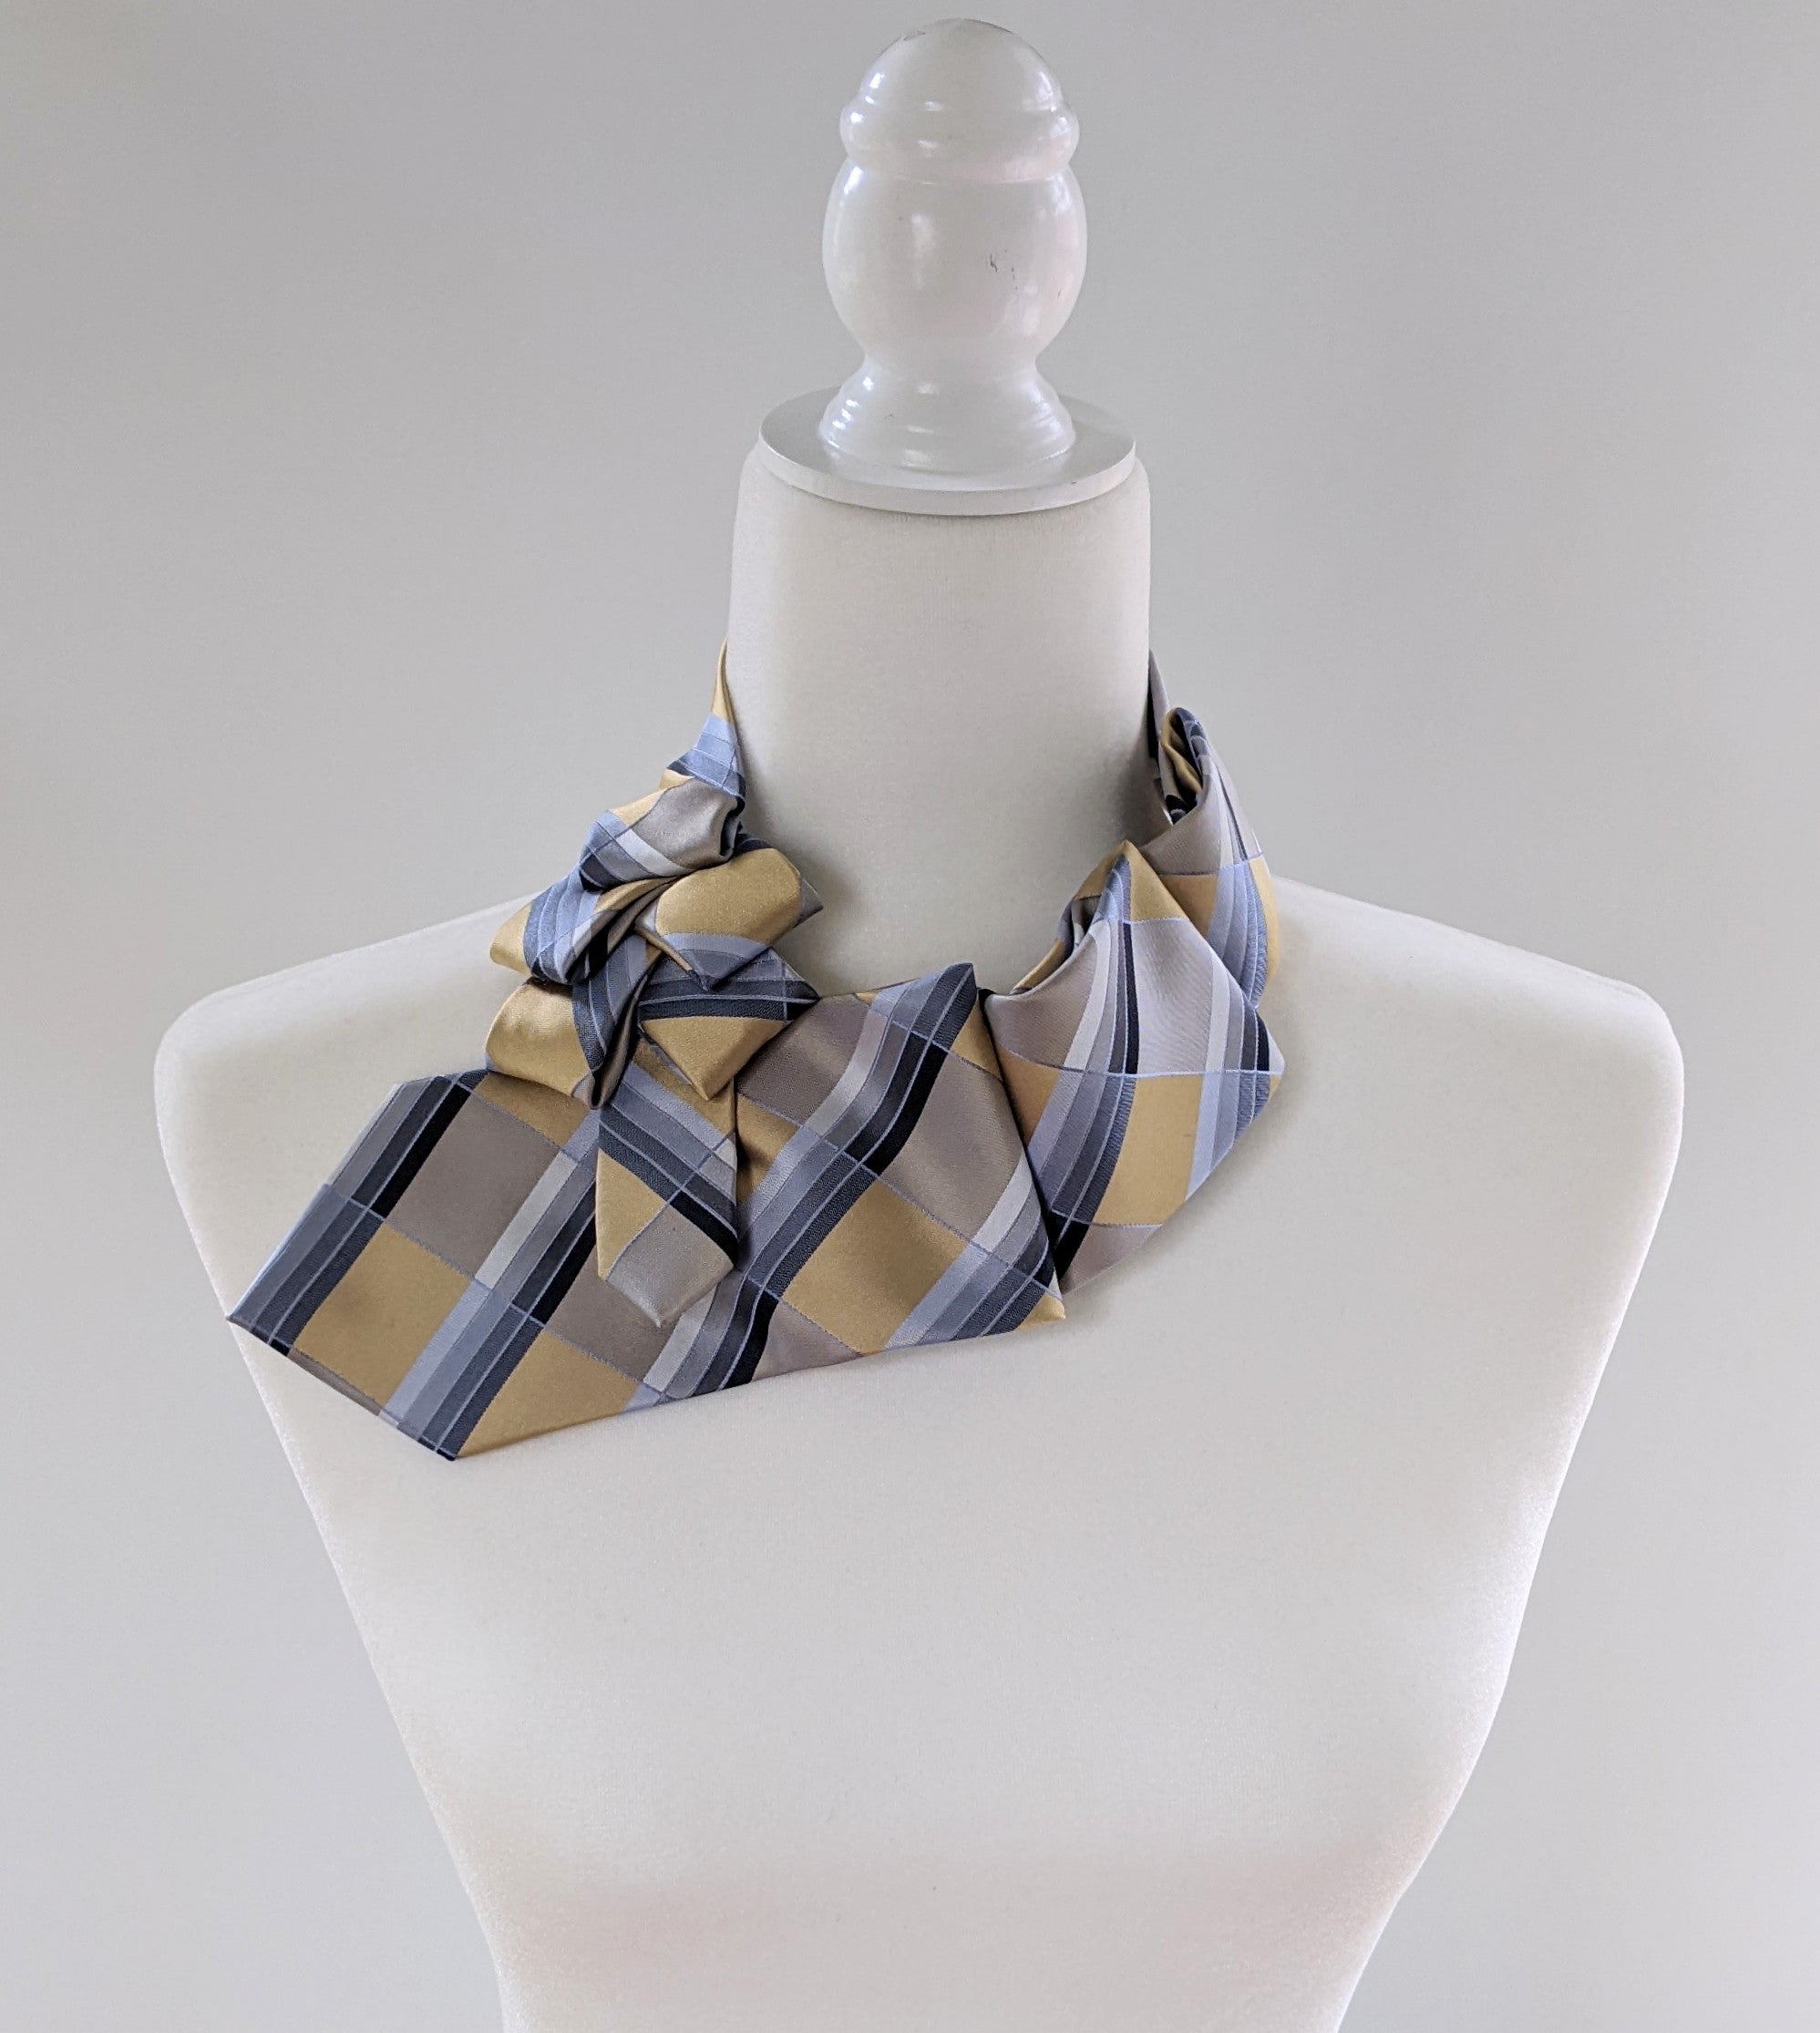 Ascot Scarf In Gold And Blue Geometric Print.